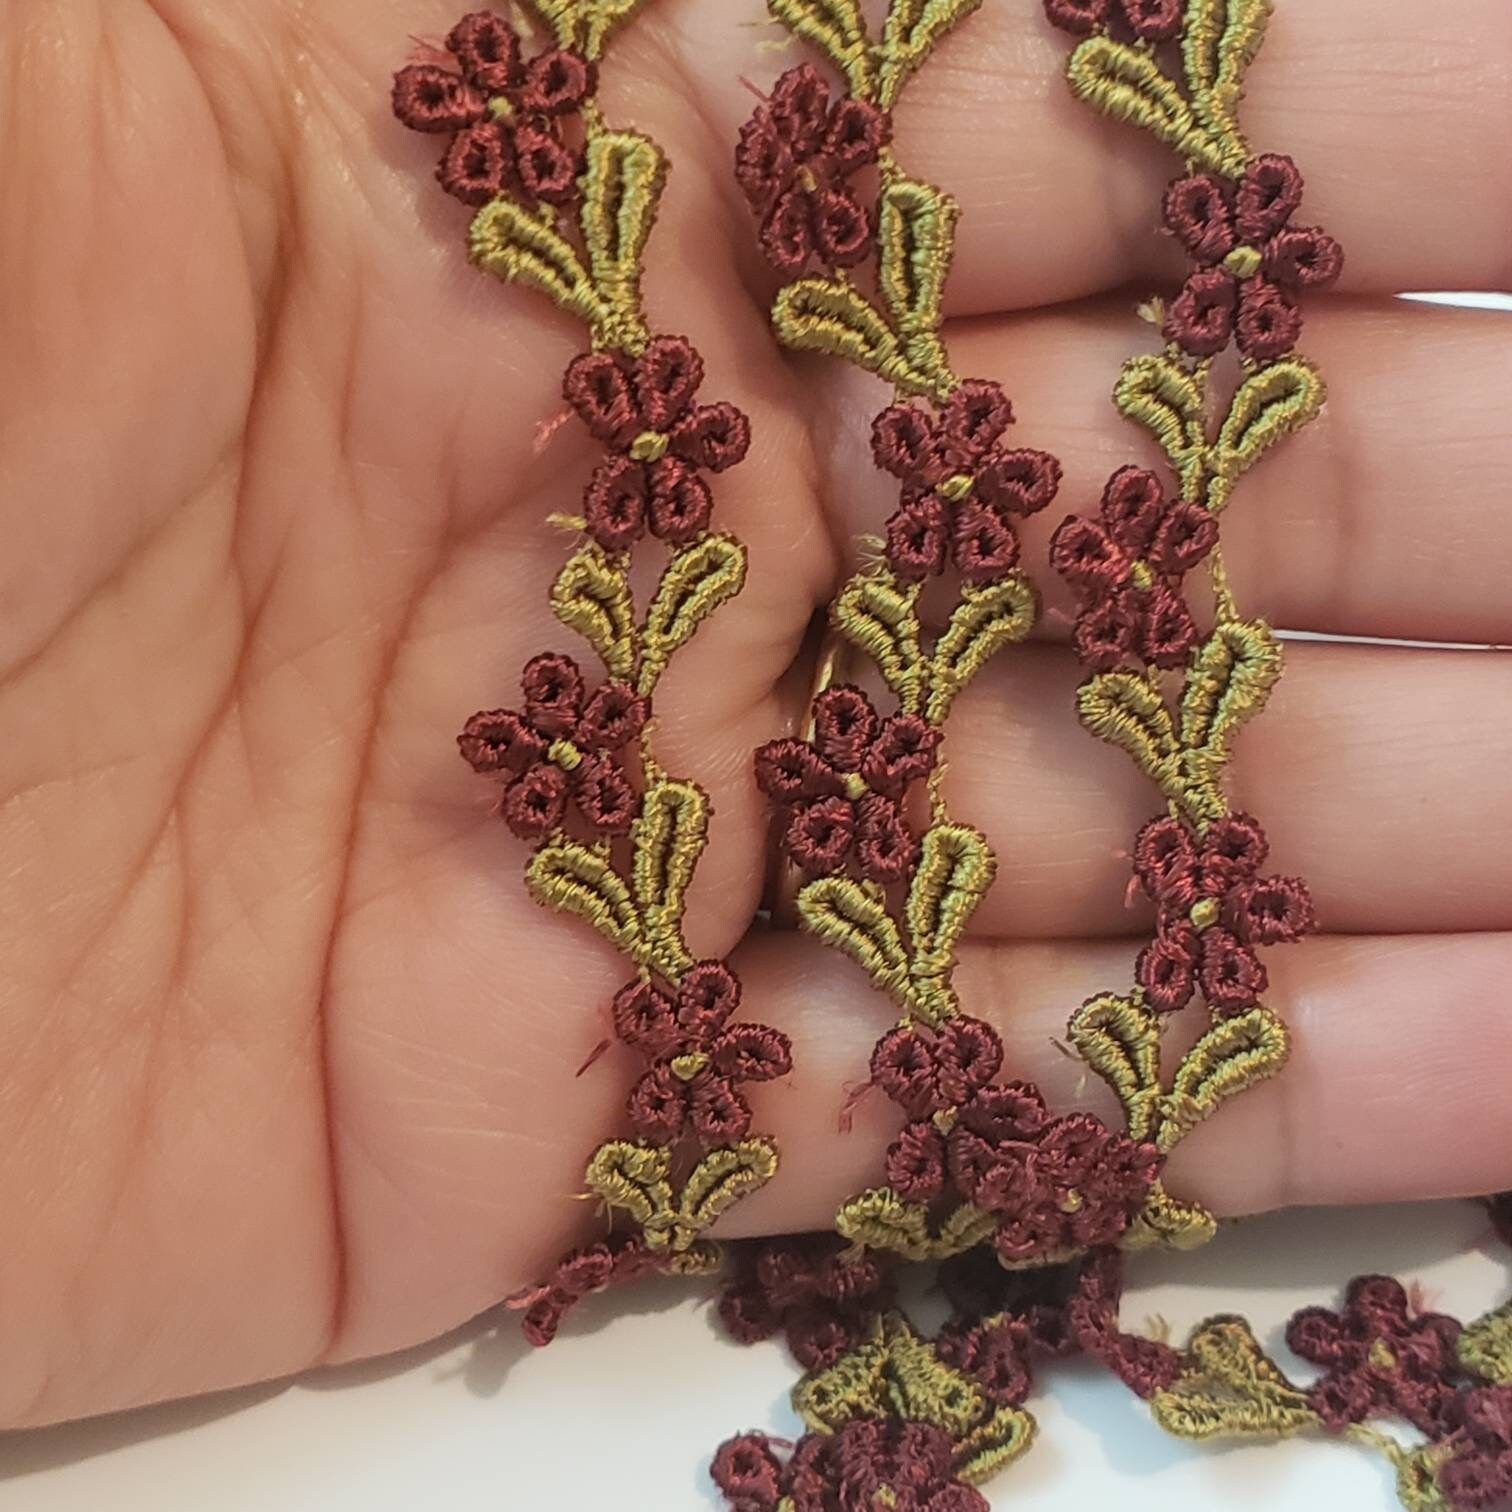 diy craft embellishments Burgundy Old Rose green Floral Embroidered lace applique Sewing Junk journal supplies Shabby chic dress trim